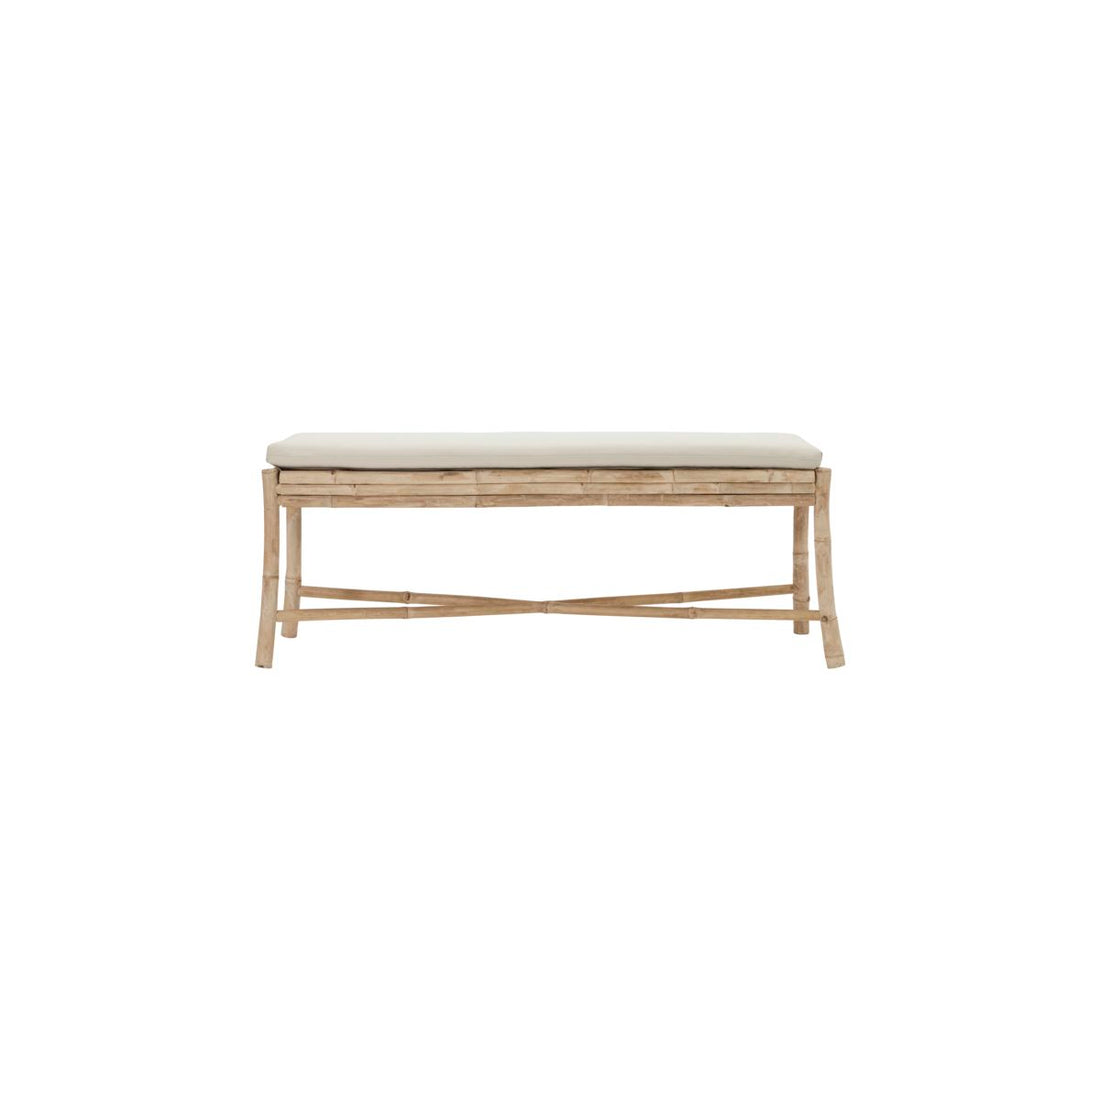 House Doctor - Bench with pillows, Sedeo, Natural - L: 130 cm, W: 38 cm, H: 45 cm